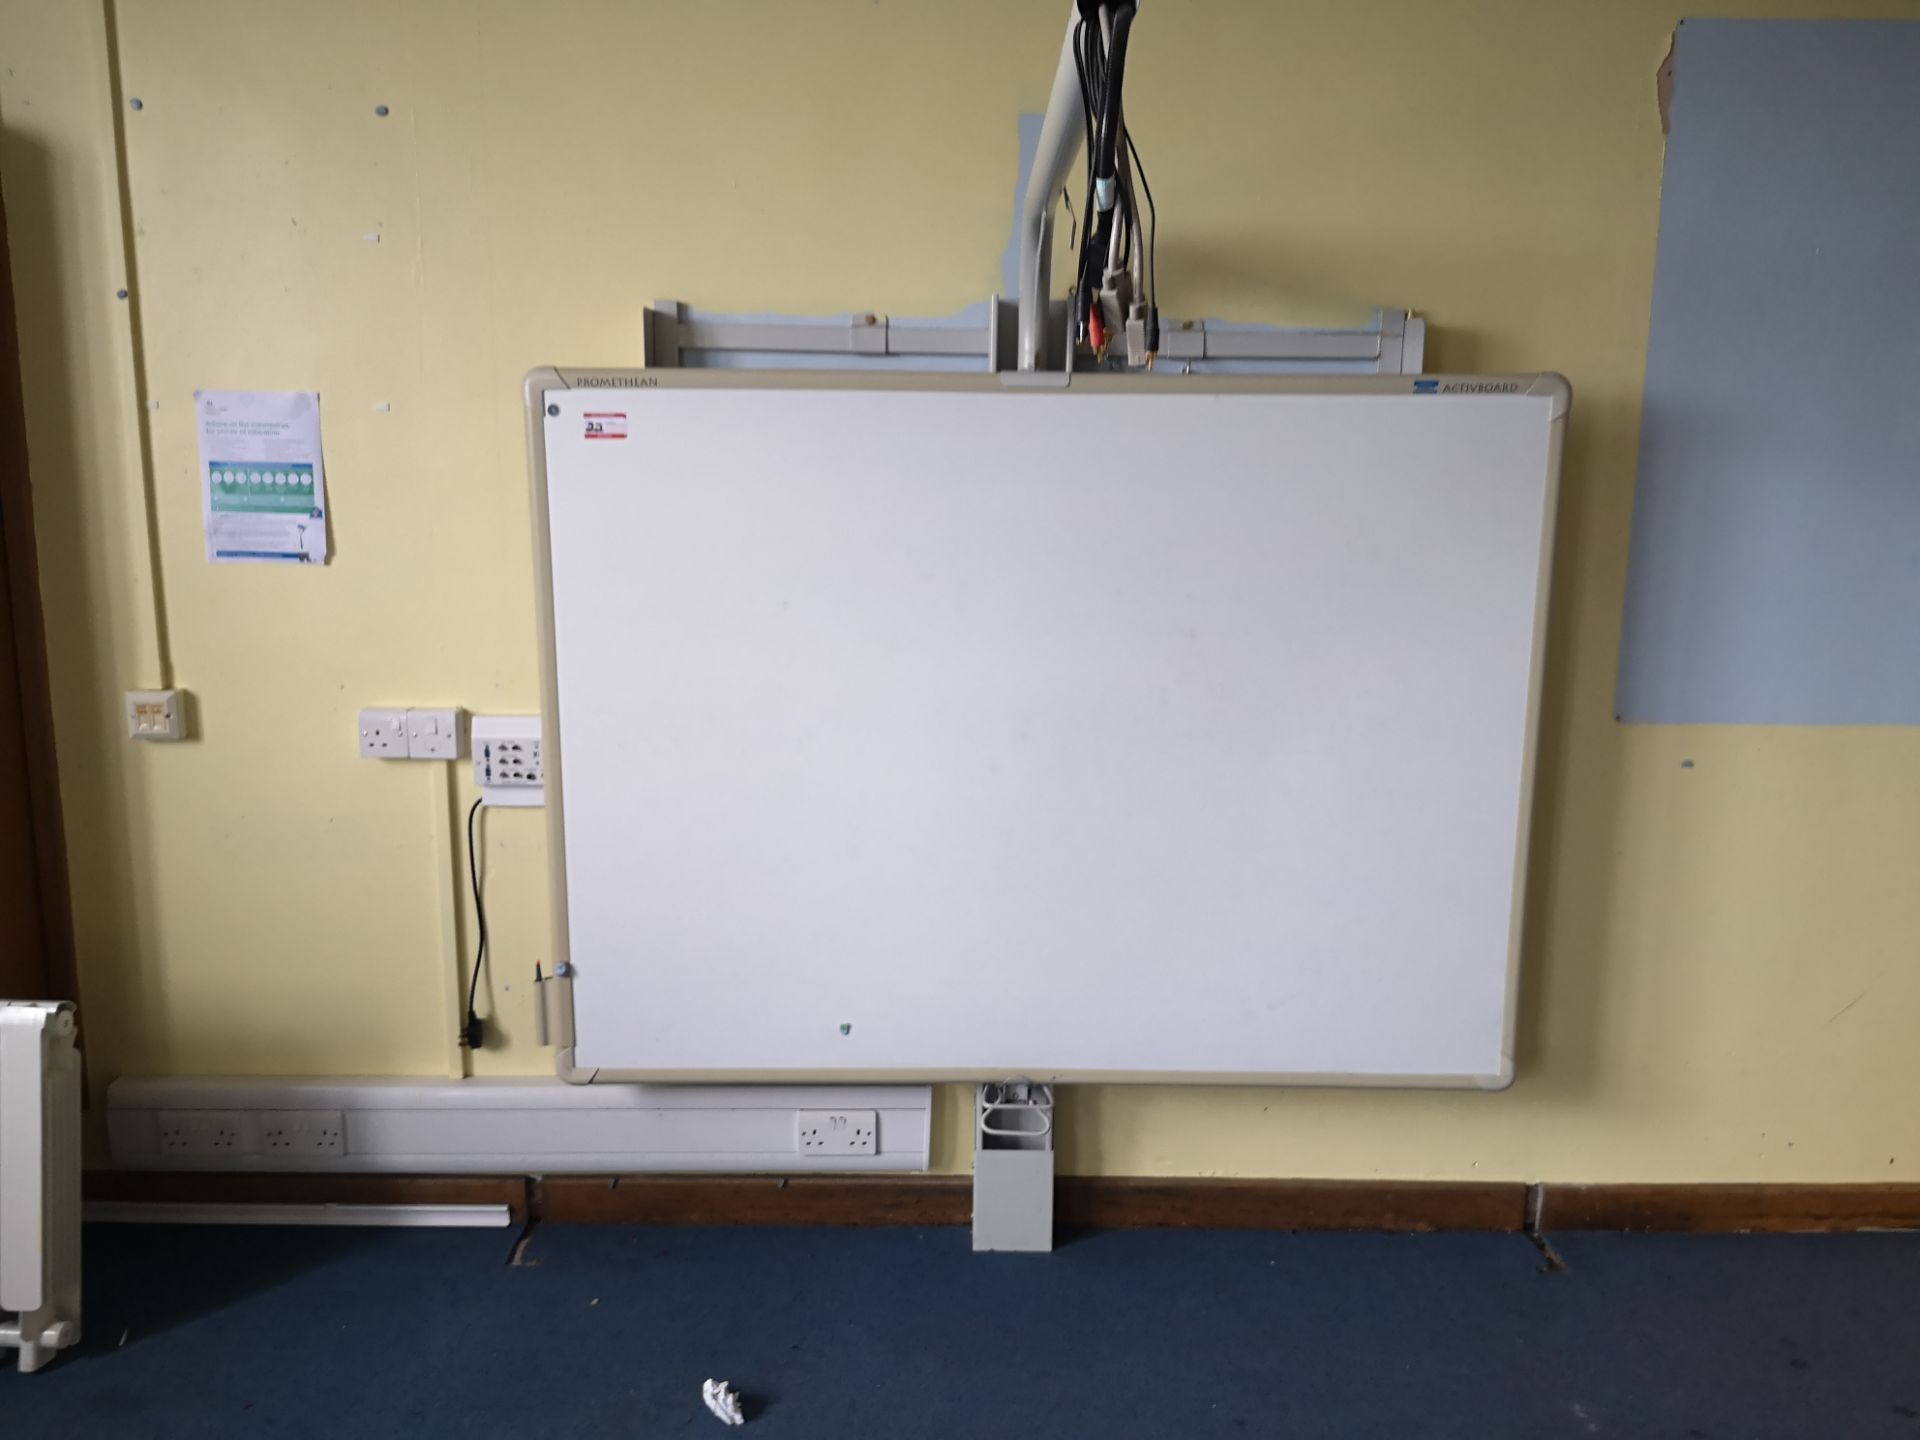 Promethean active board [on stand]